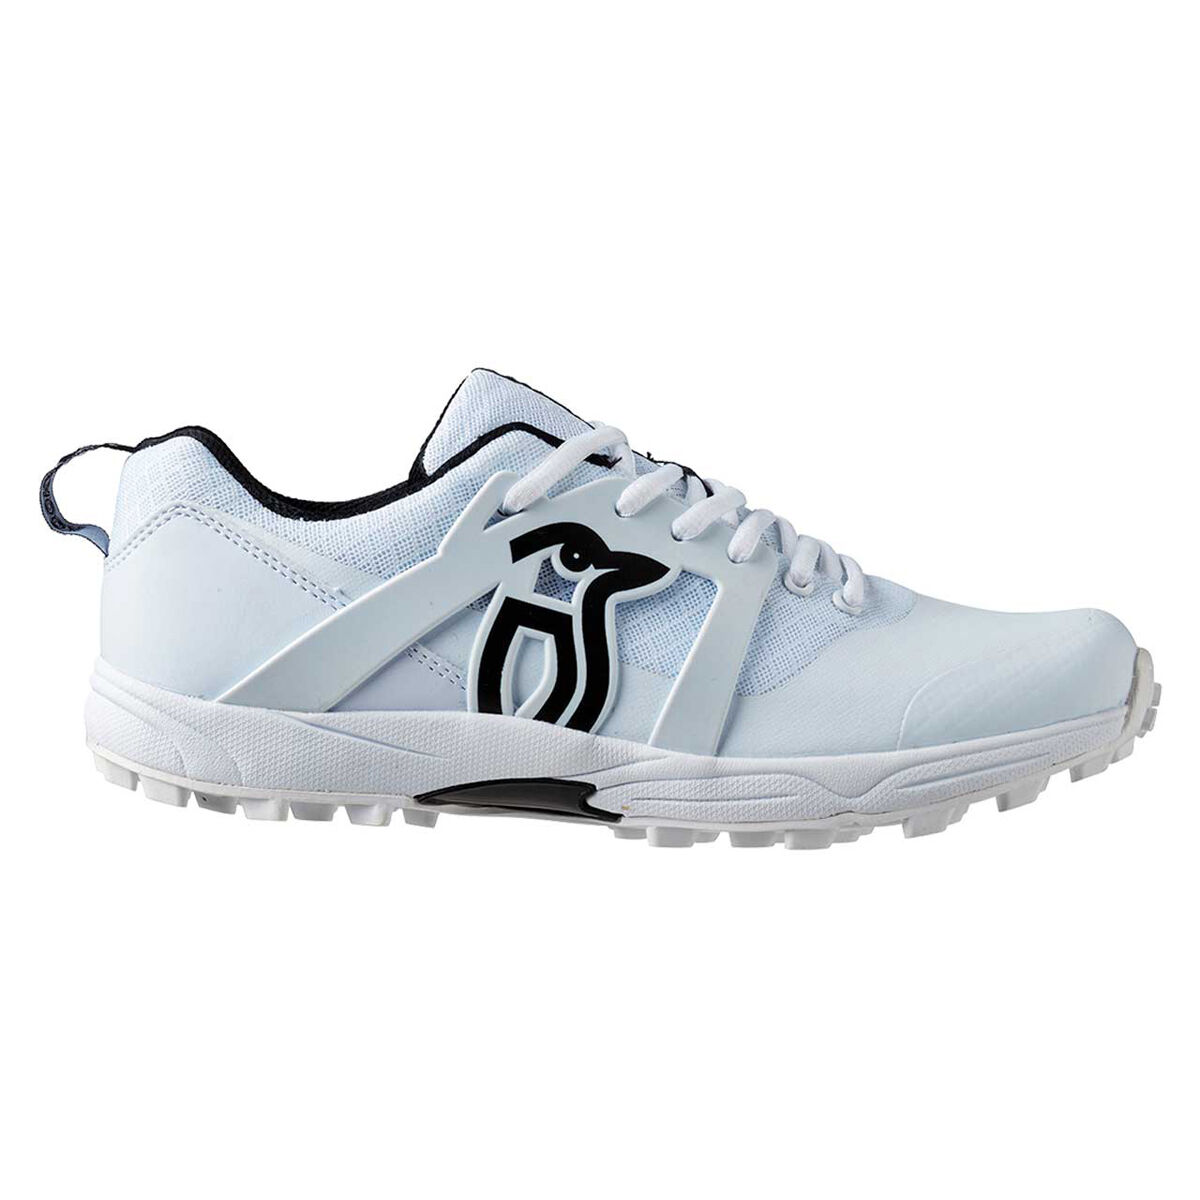 cricket shoes white